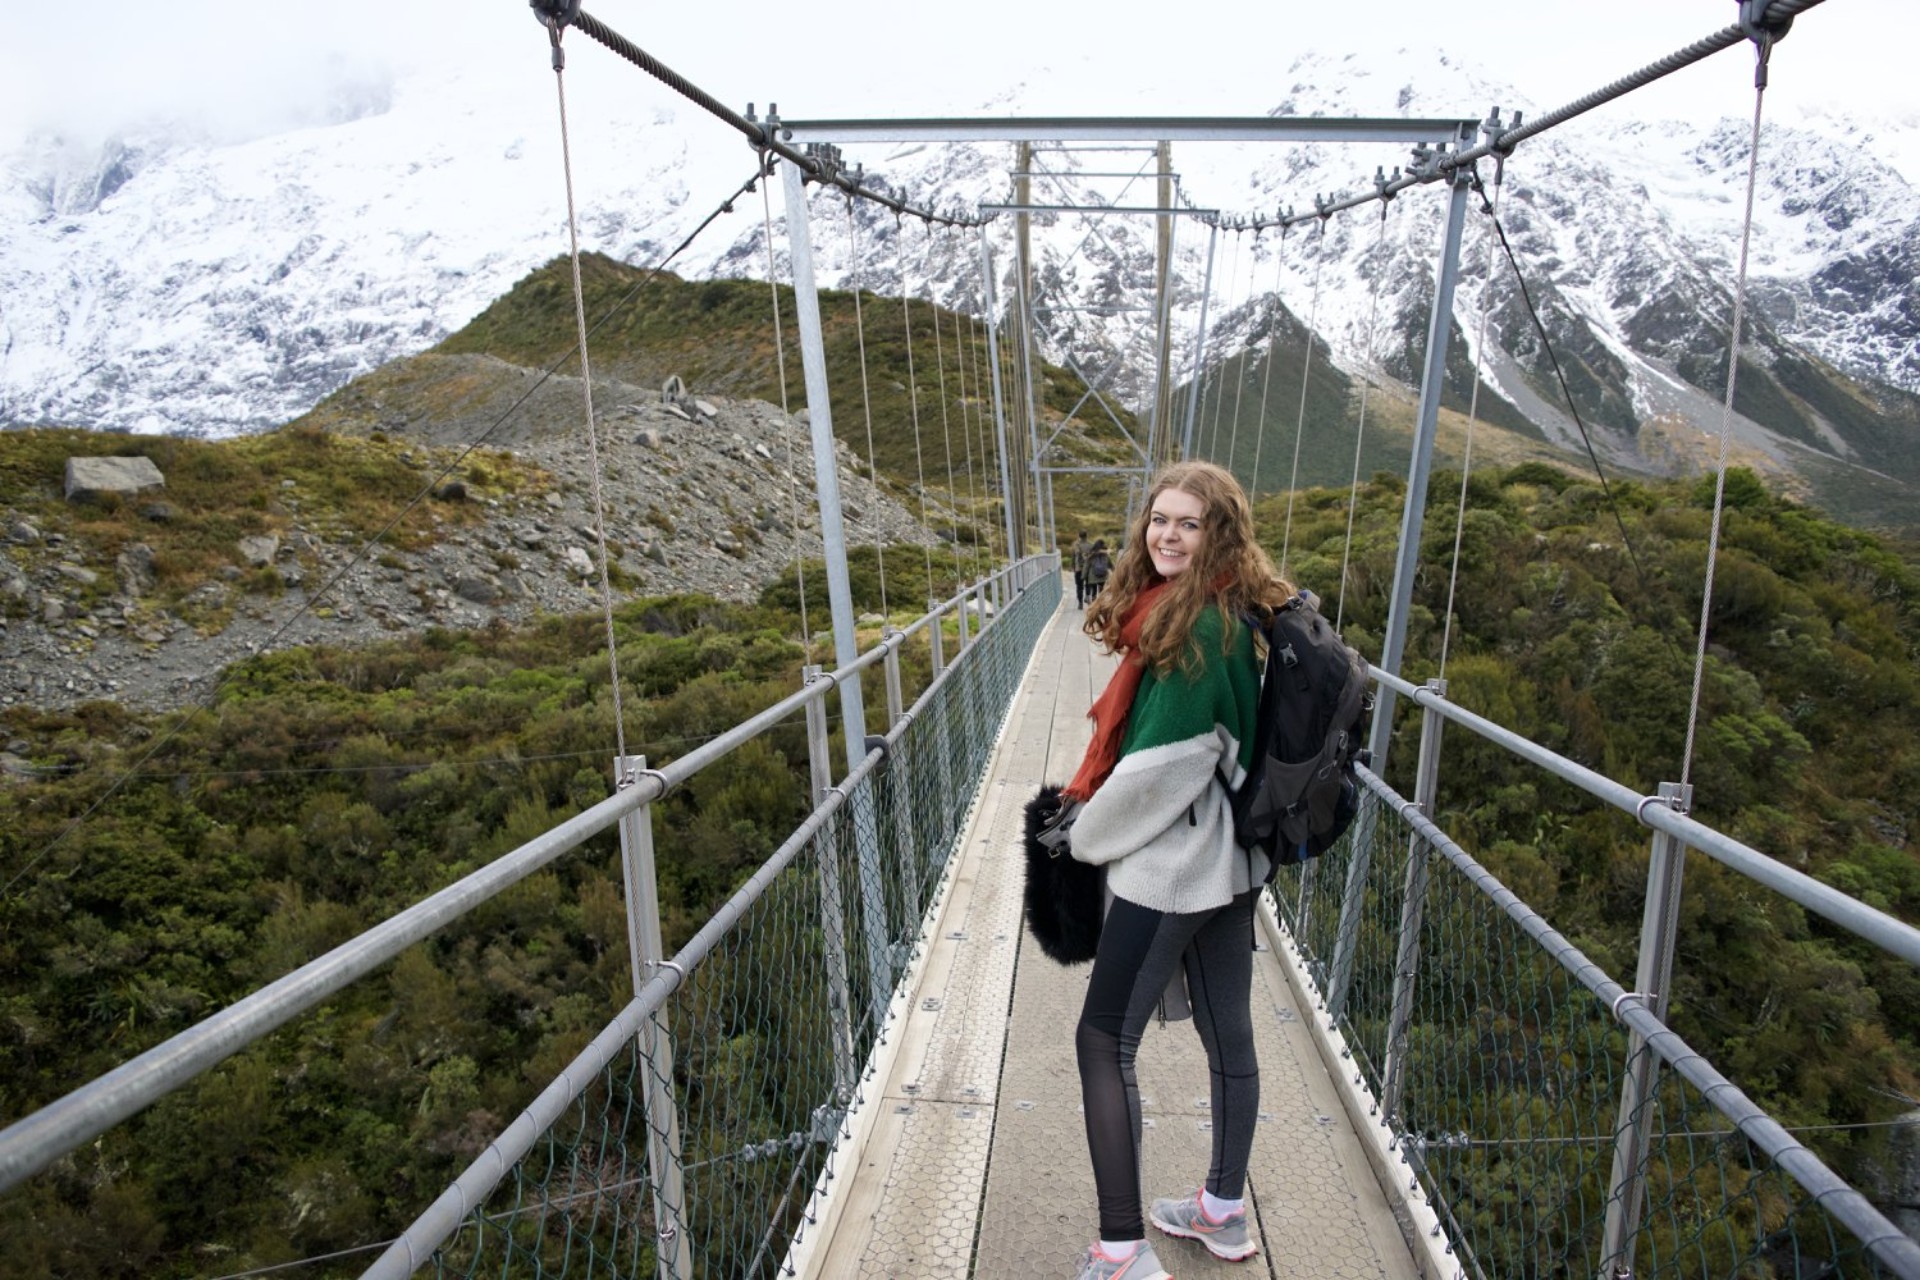 New Zealand Packing List, What to Pack for Two Months in New Zealand's Winter